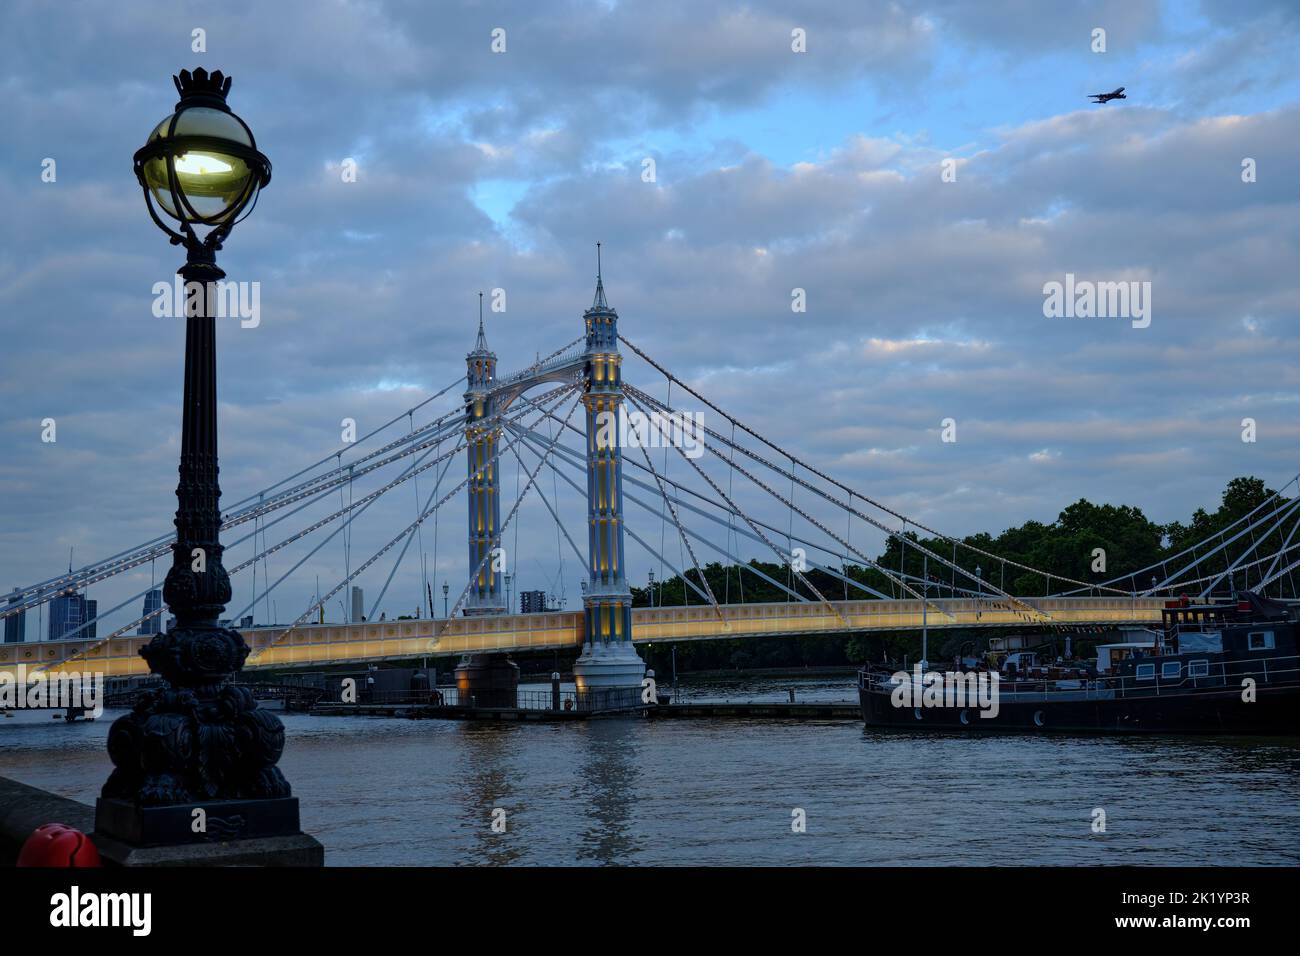 View of Albert Bridge from north side of River Thames in London at dusk Stock Photo